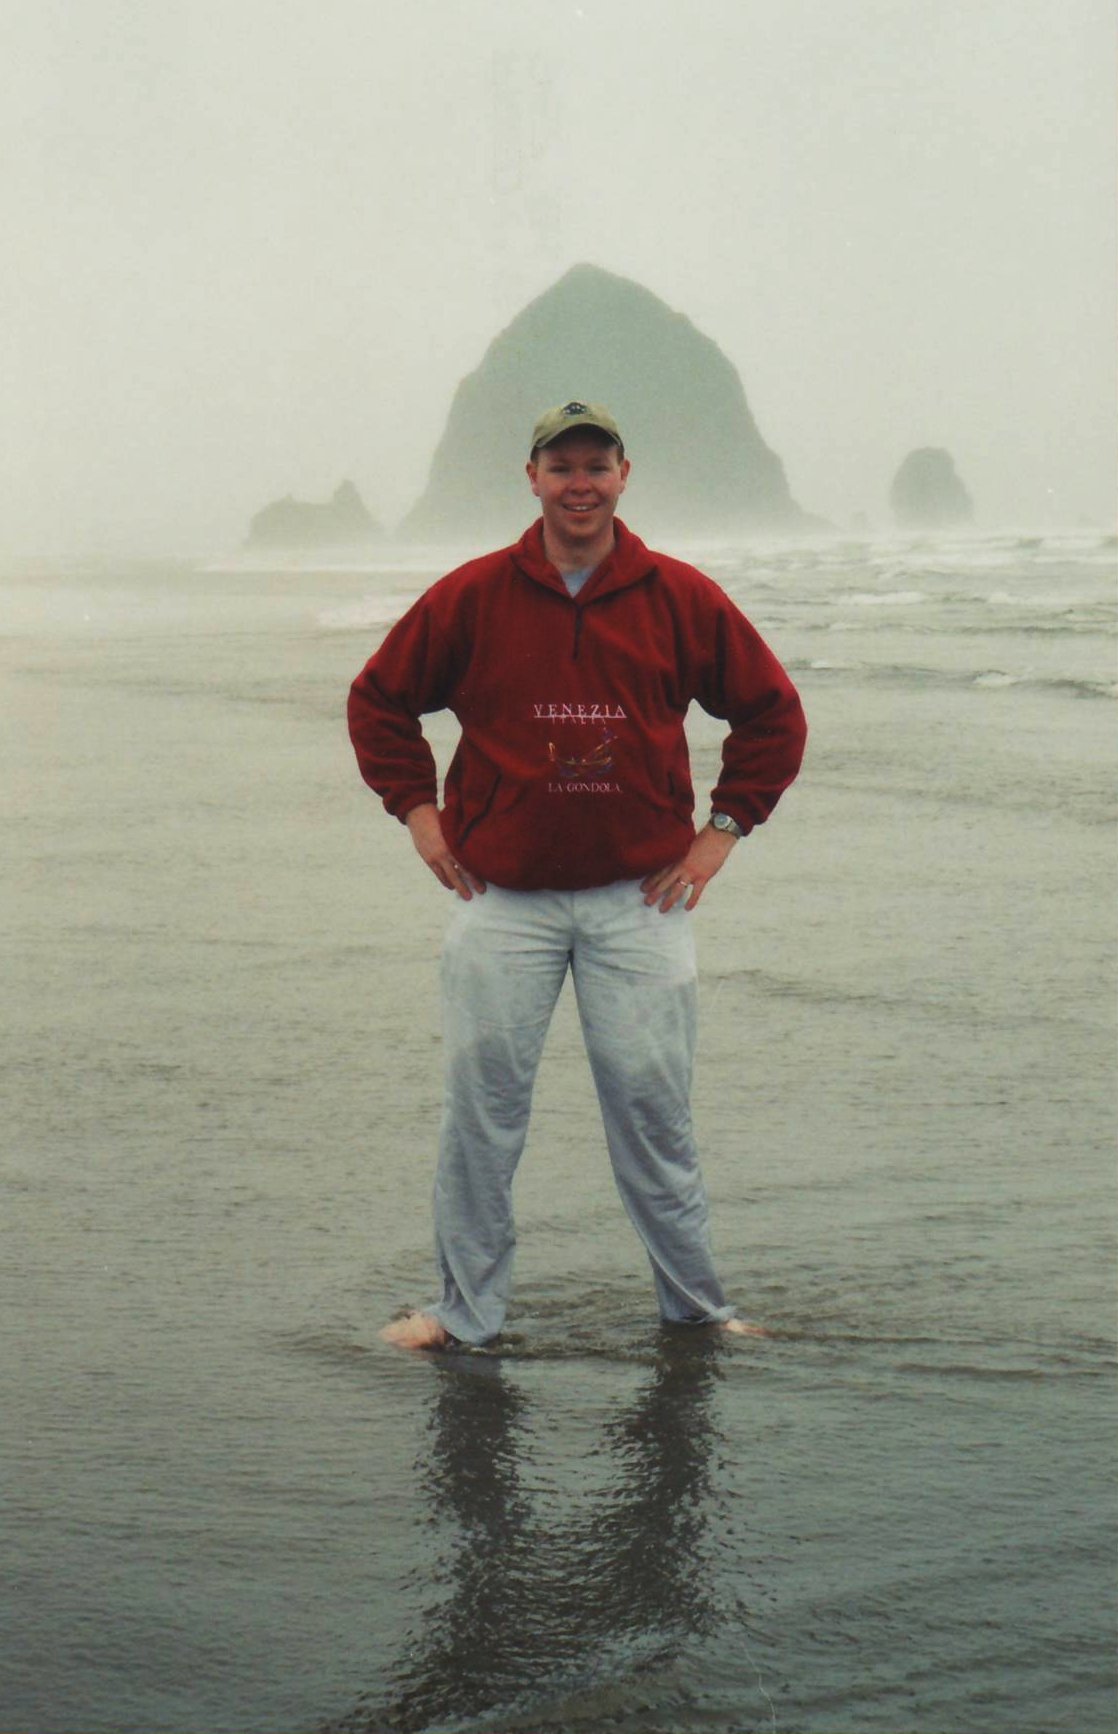 Steve at Cannon Beach with Haystack Rock in background